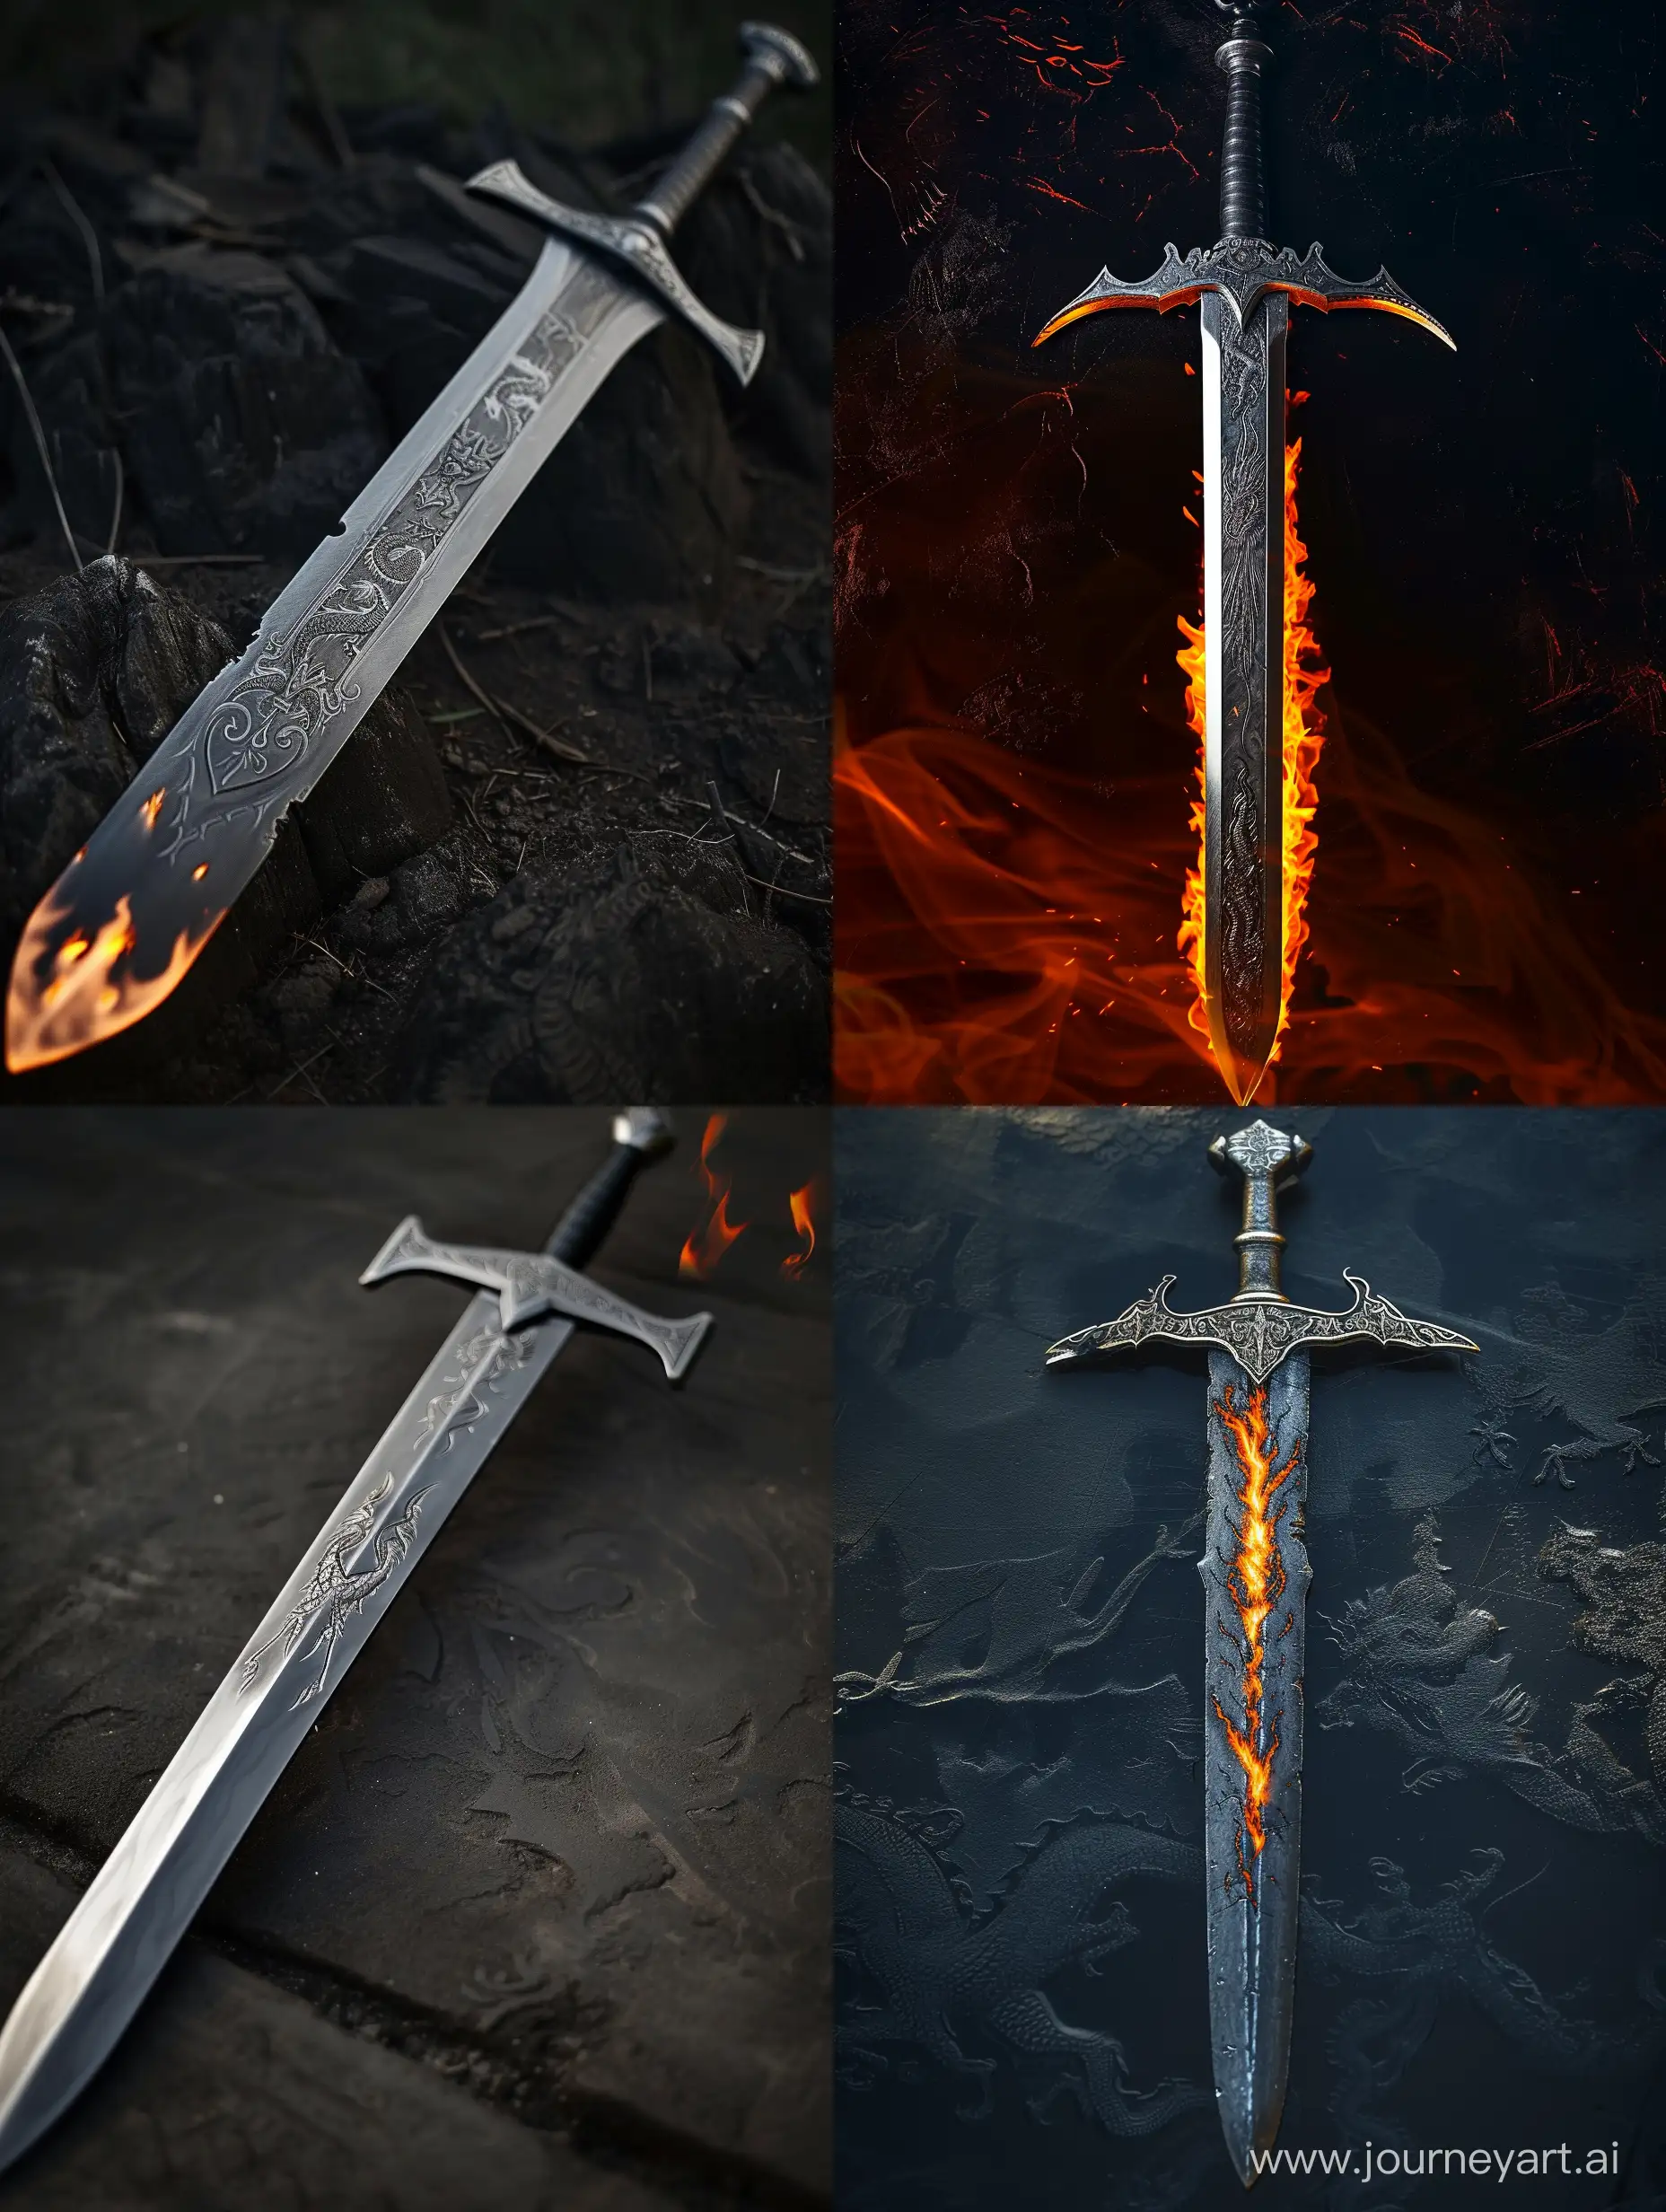 Legendary weapon, a two-handed sword made of black steel, the blade is ablaze with fire, a dragon engraving on the guard